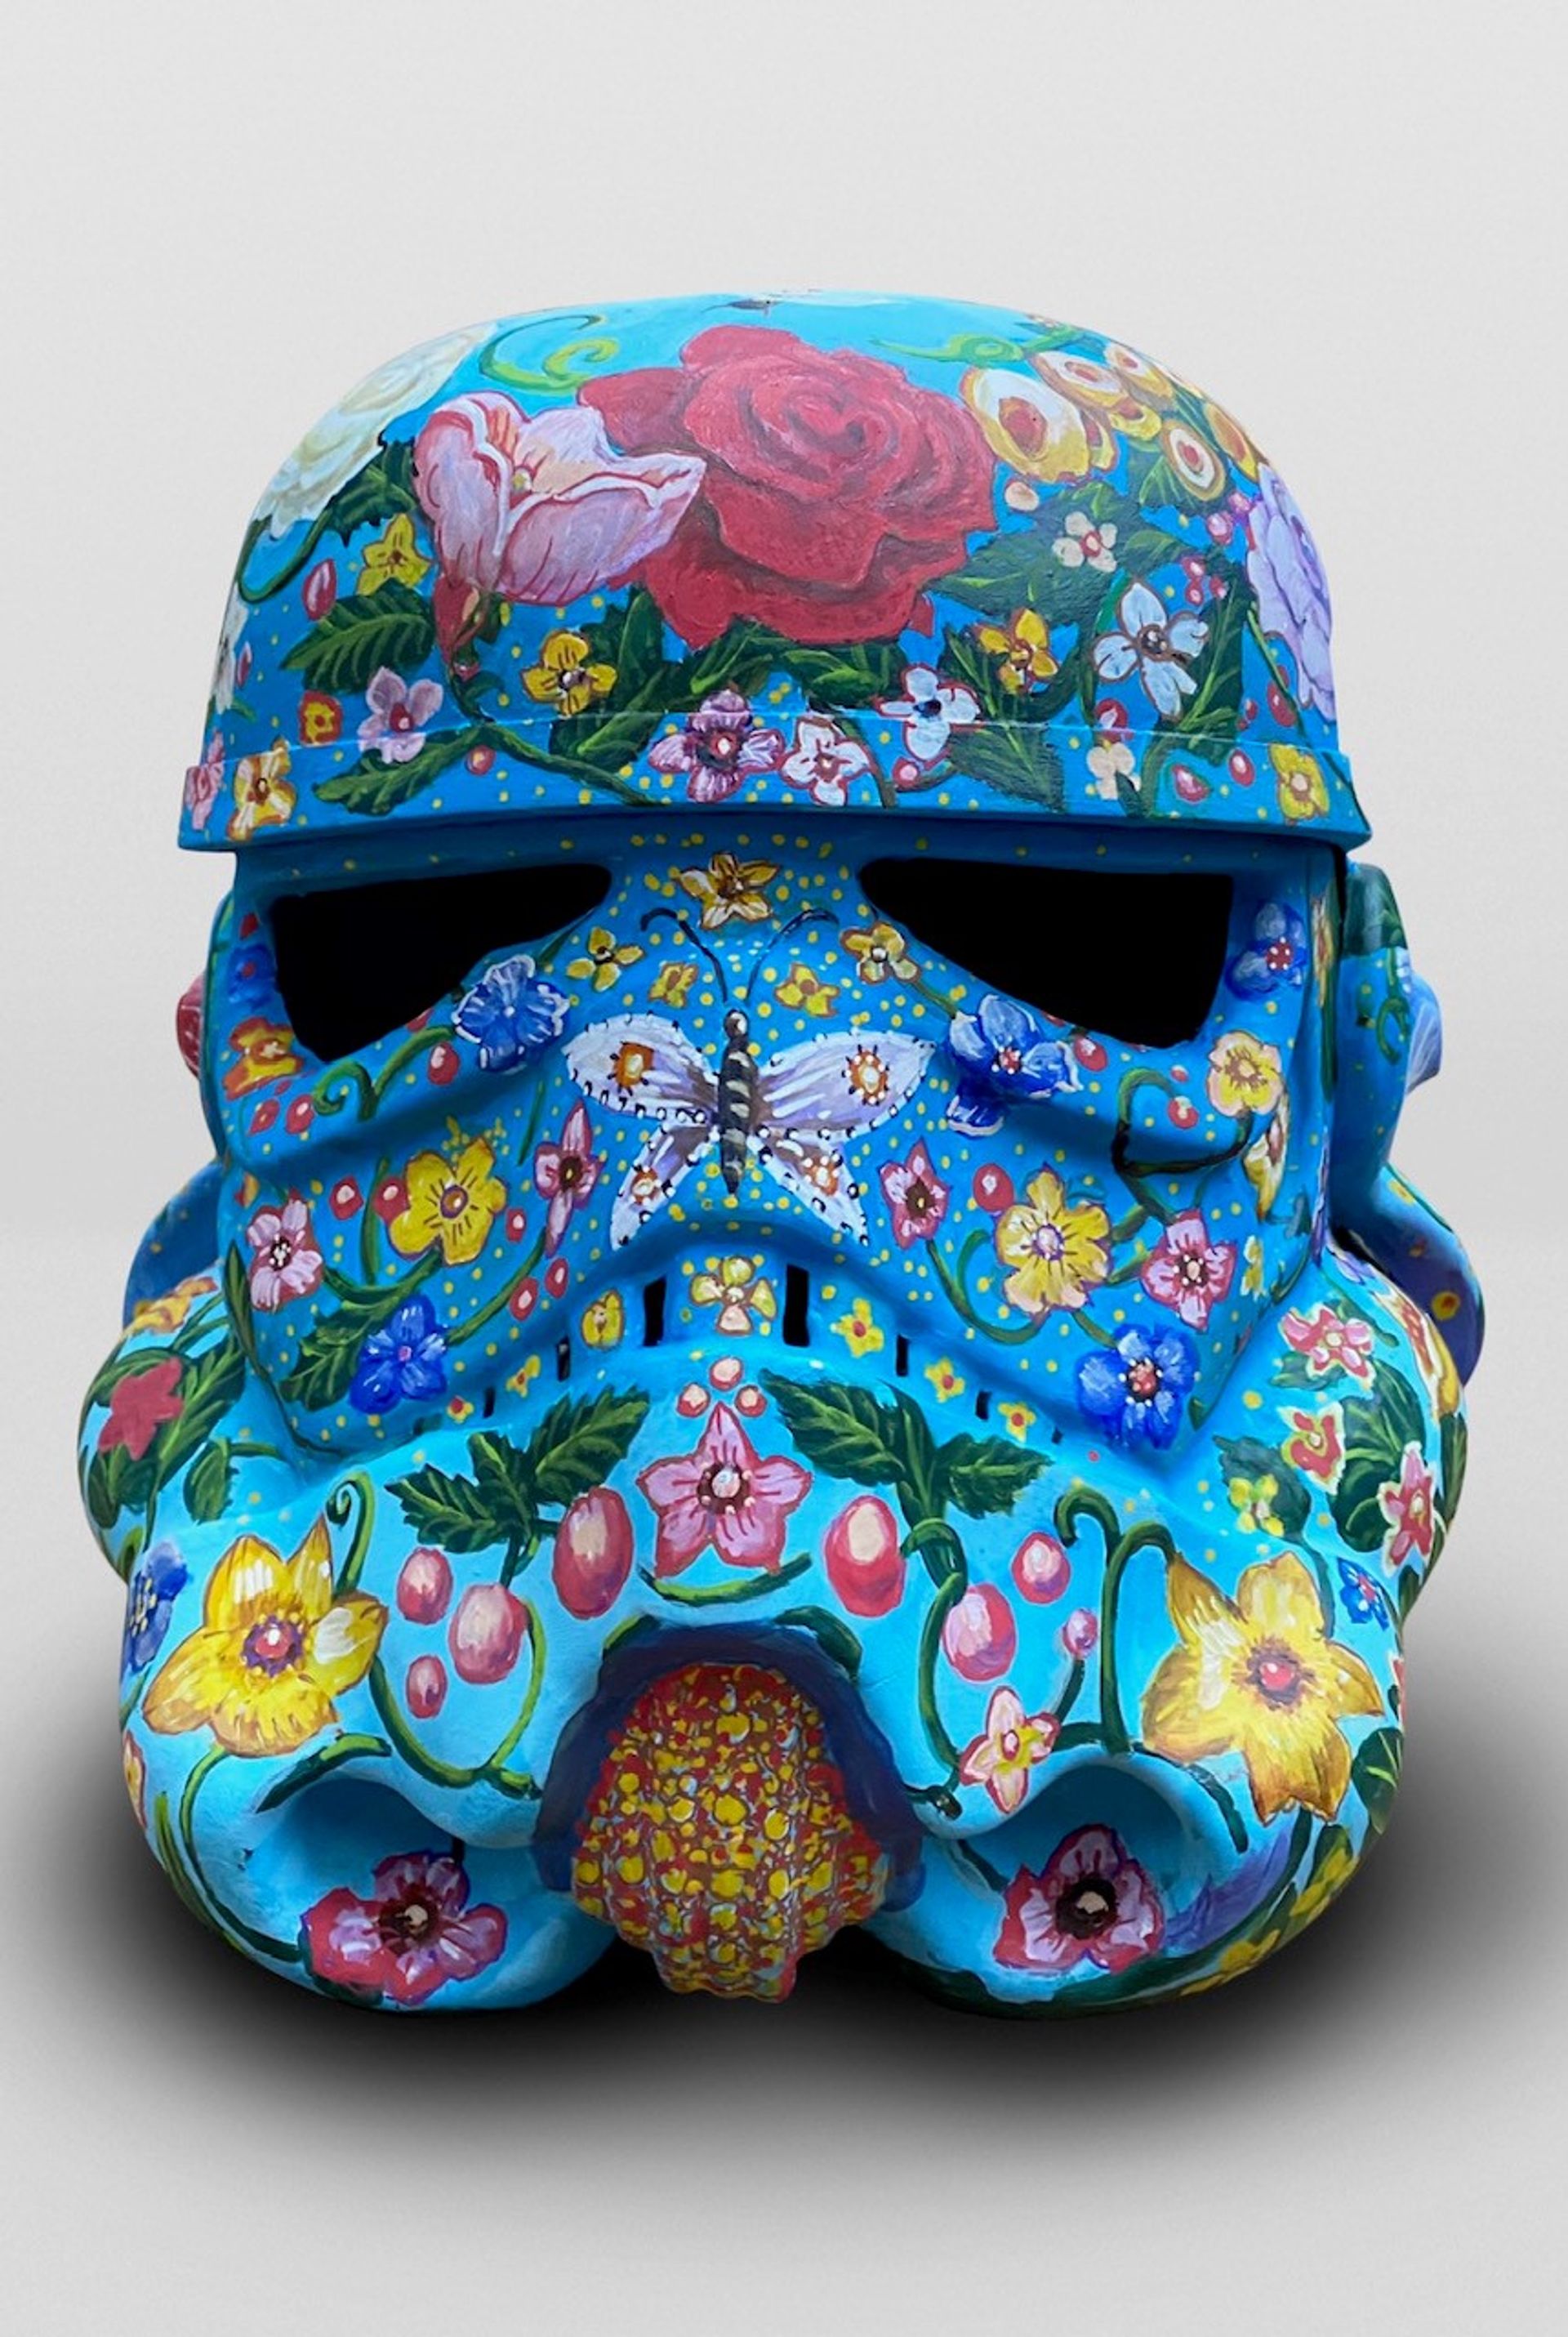 Unskilled Worker's Like Boy Flowers (2019), chalk, pastel, ink, pen and charcoal on a Stormtrooper helmet—Art Wars offered for sale an NFT attached to an image of the work

Courtesy of the artist

